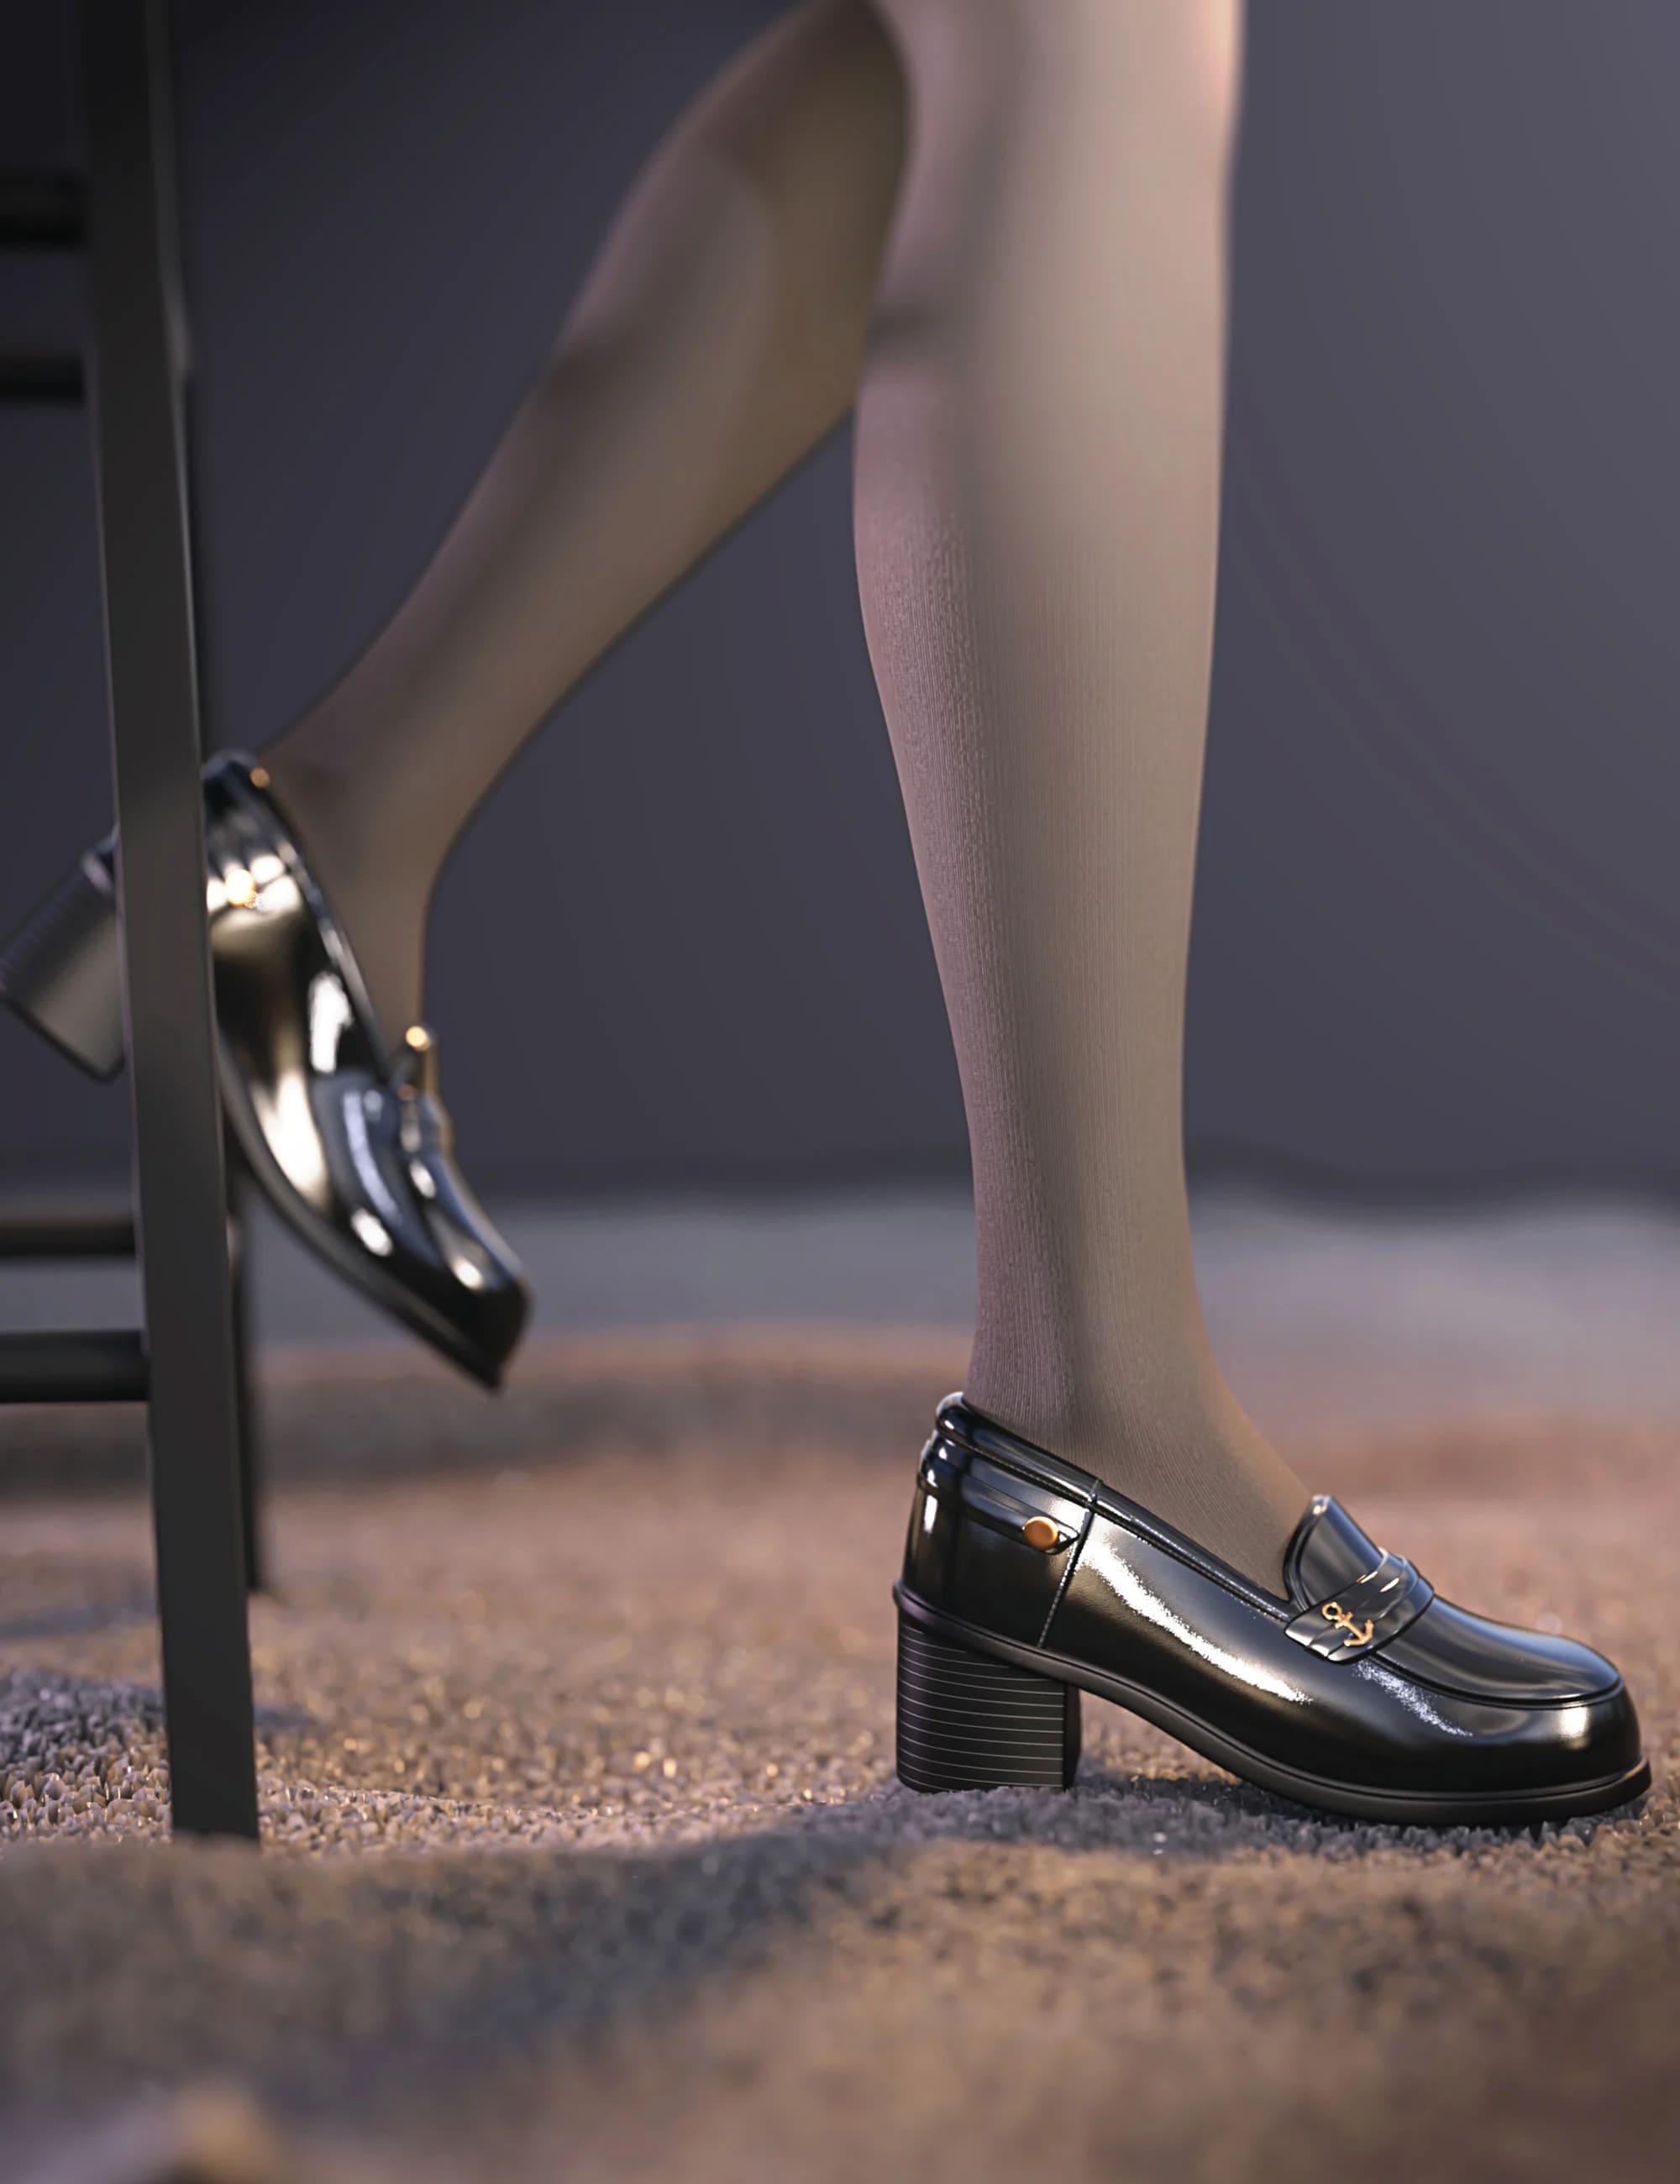 SU Leather Shoes for Genesis 8 and 8.1 Females and Genesis 9_DAZ3D下载站